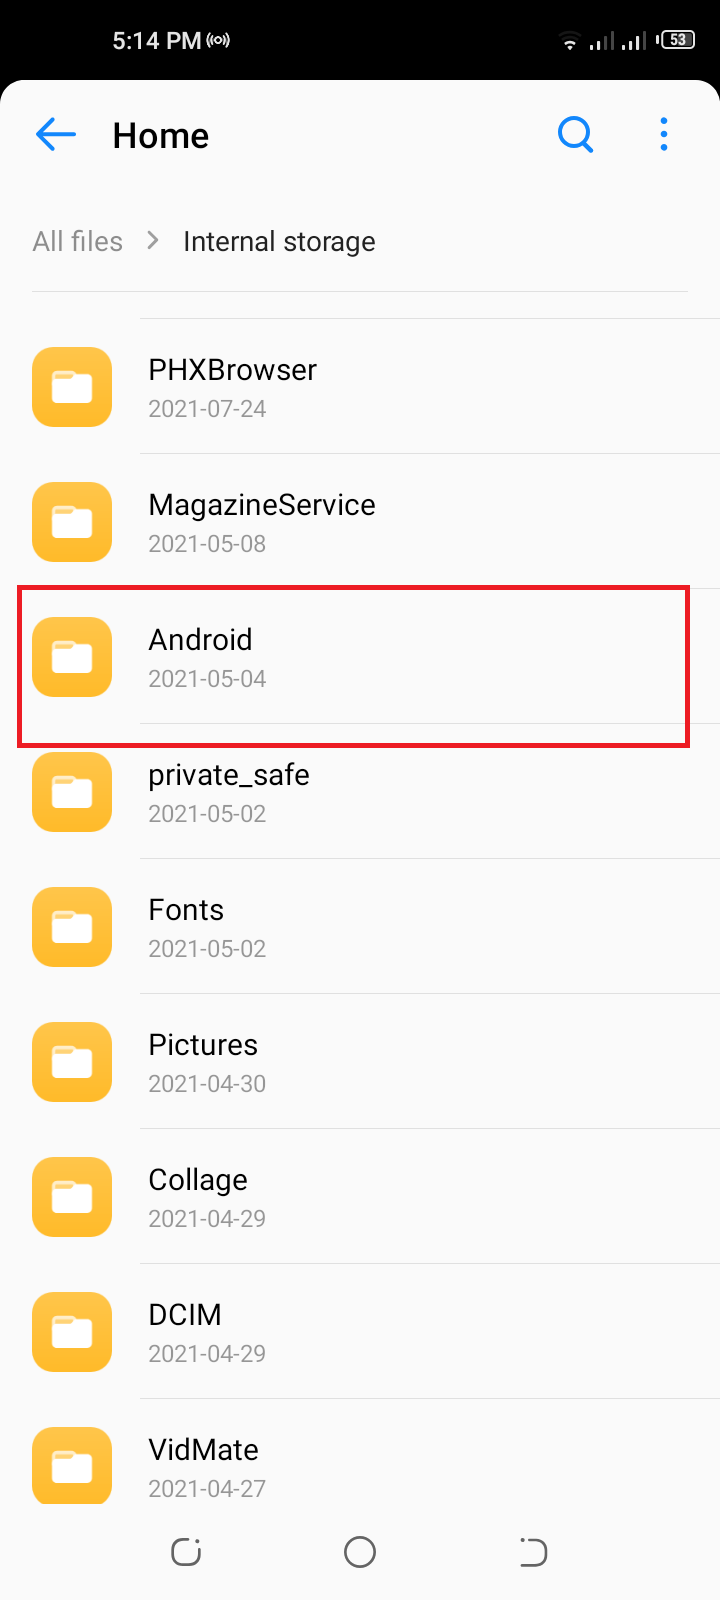 Open your phone’s file manager app